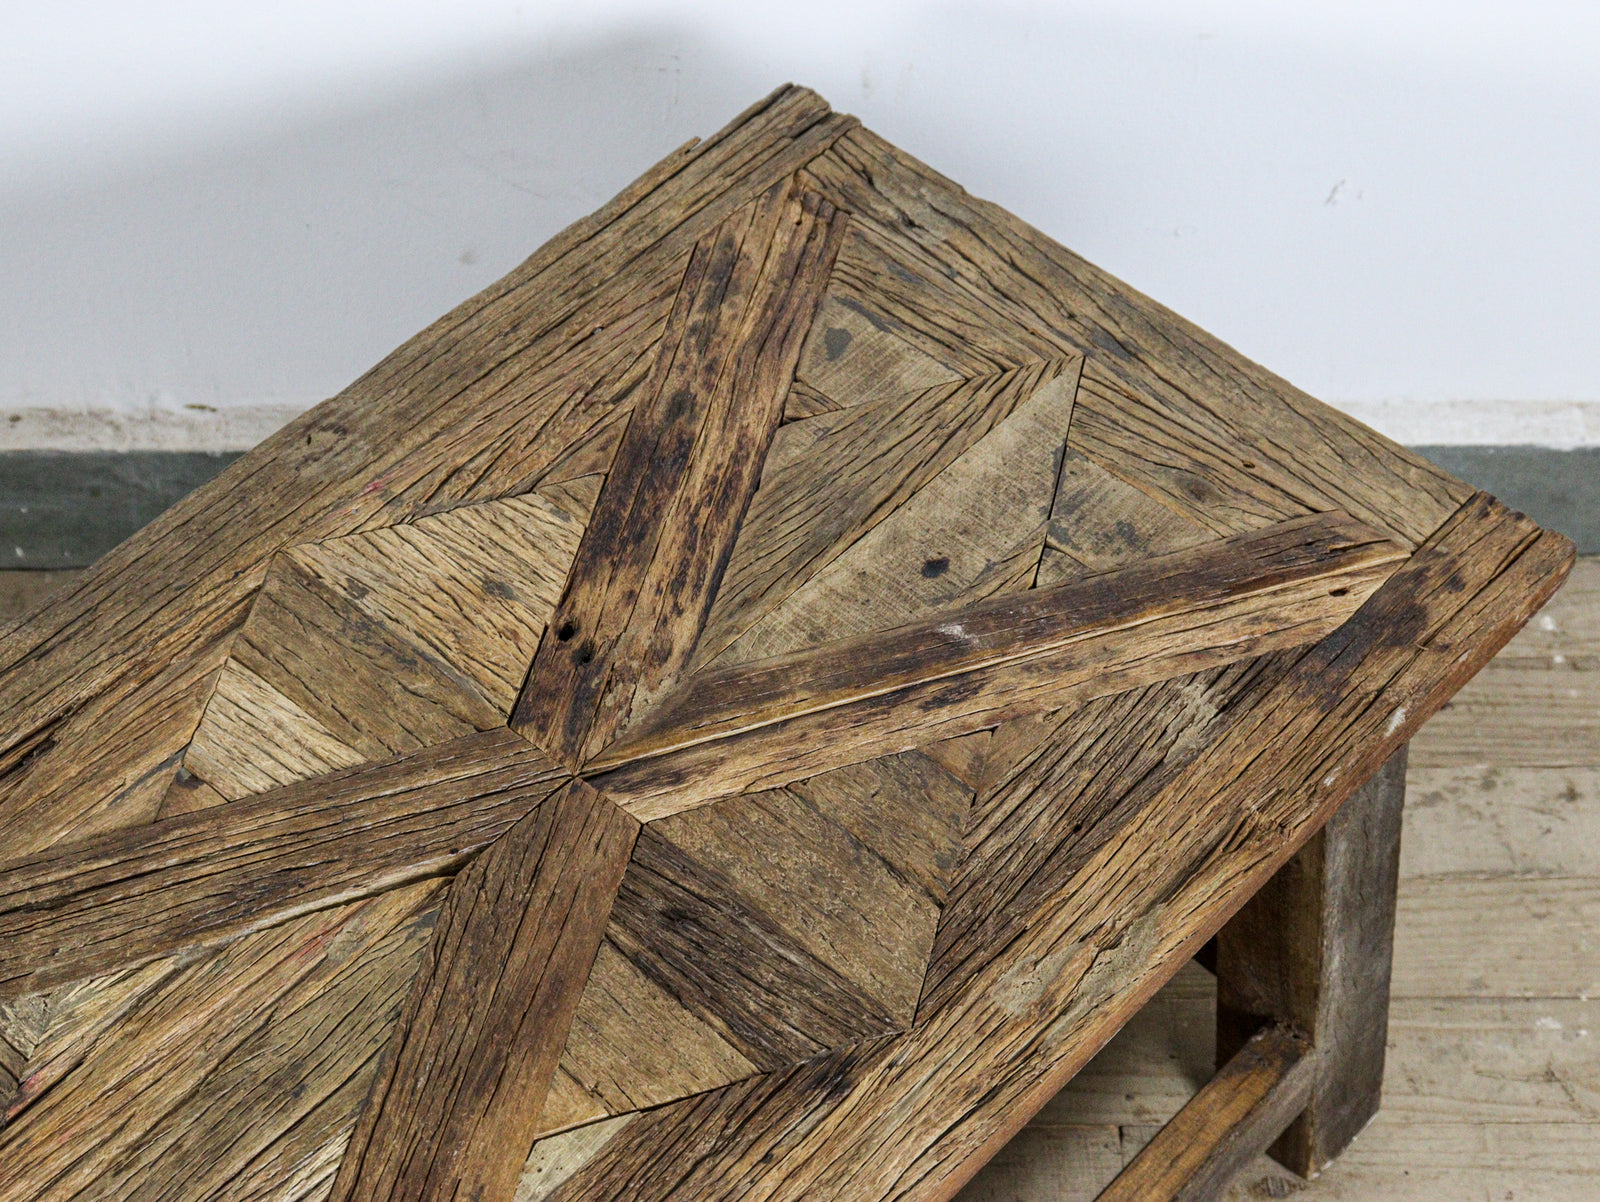 MILL-2029 Rustic Wooden Coffee Table 150 cm C25